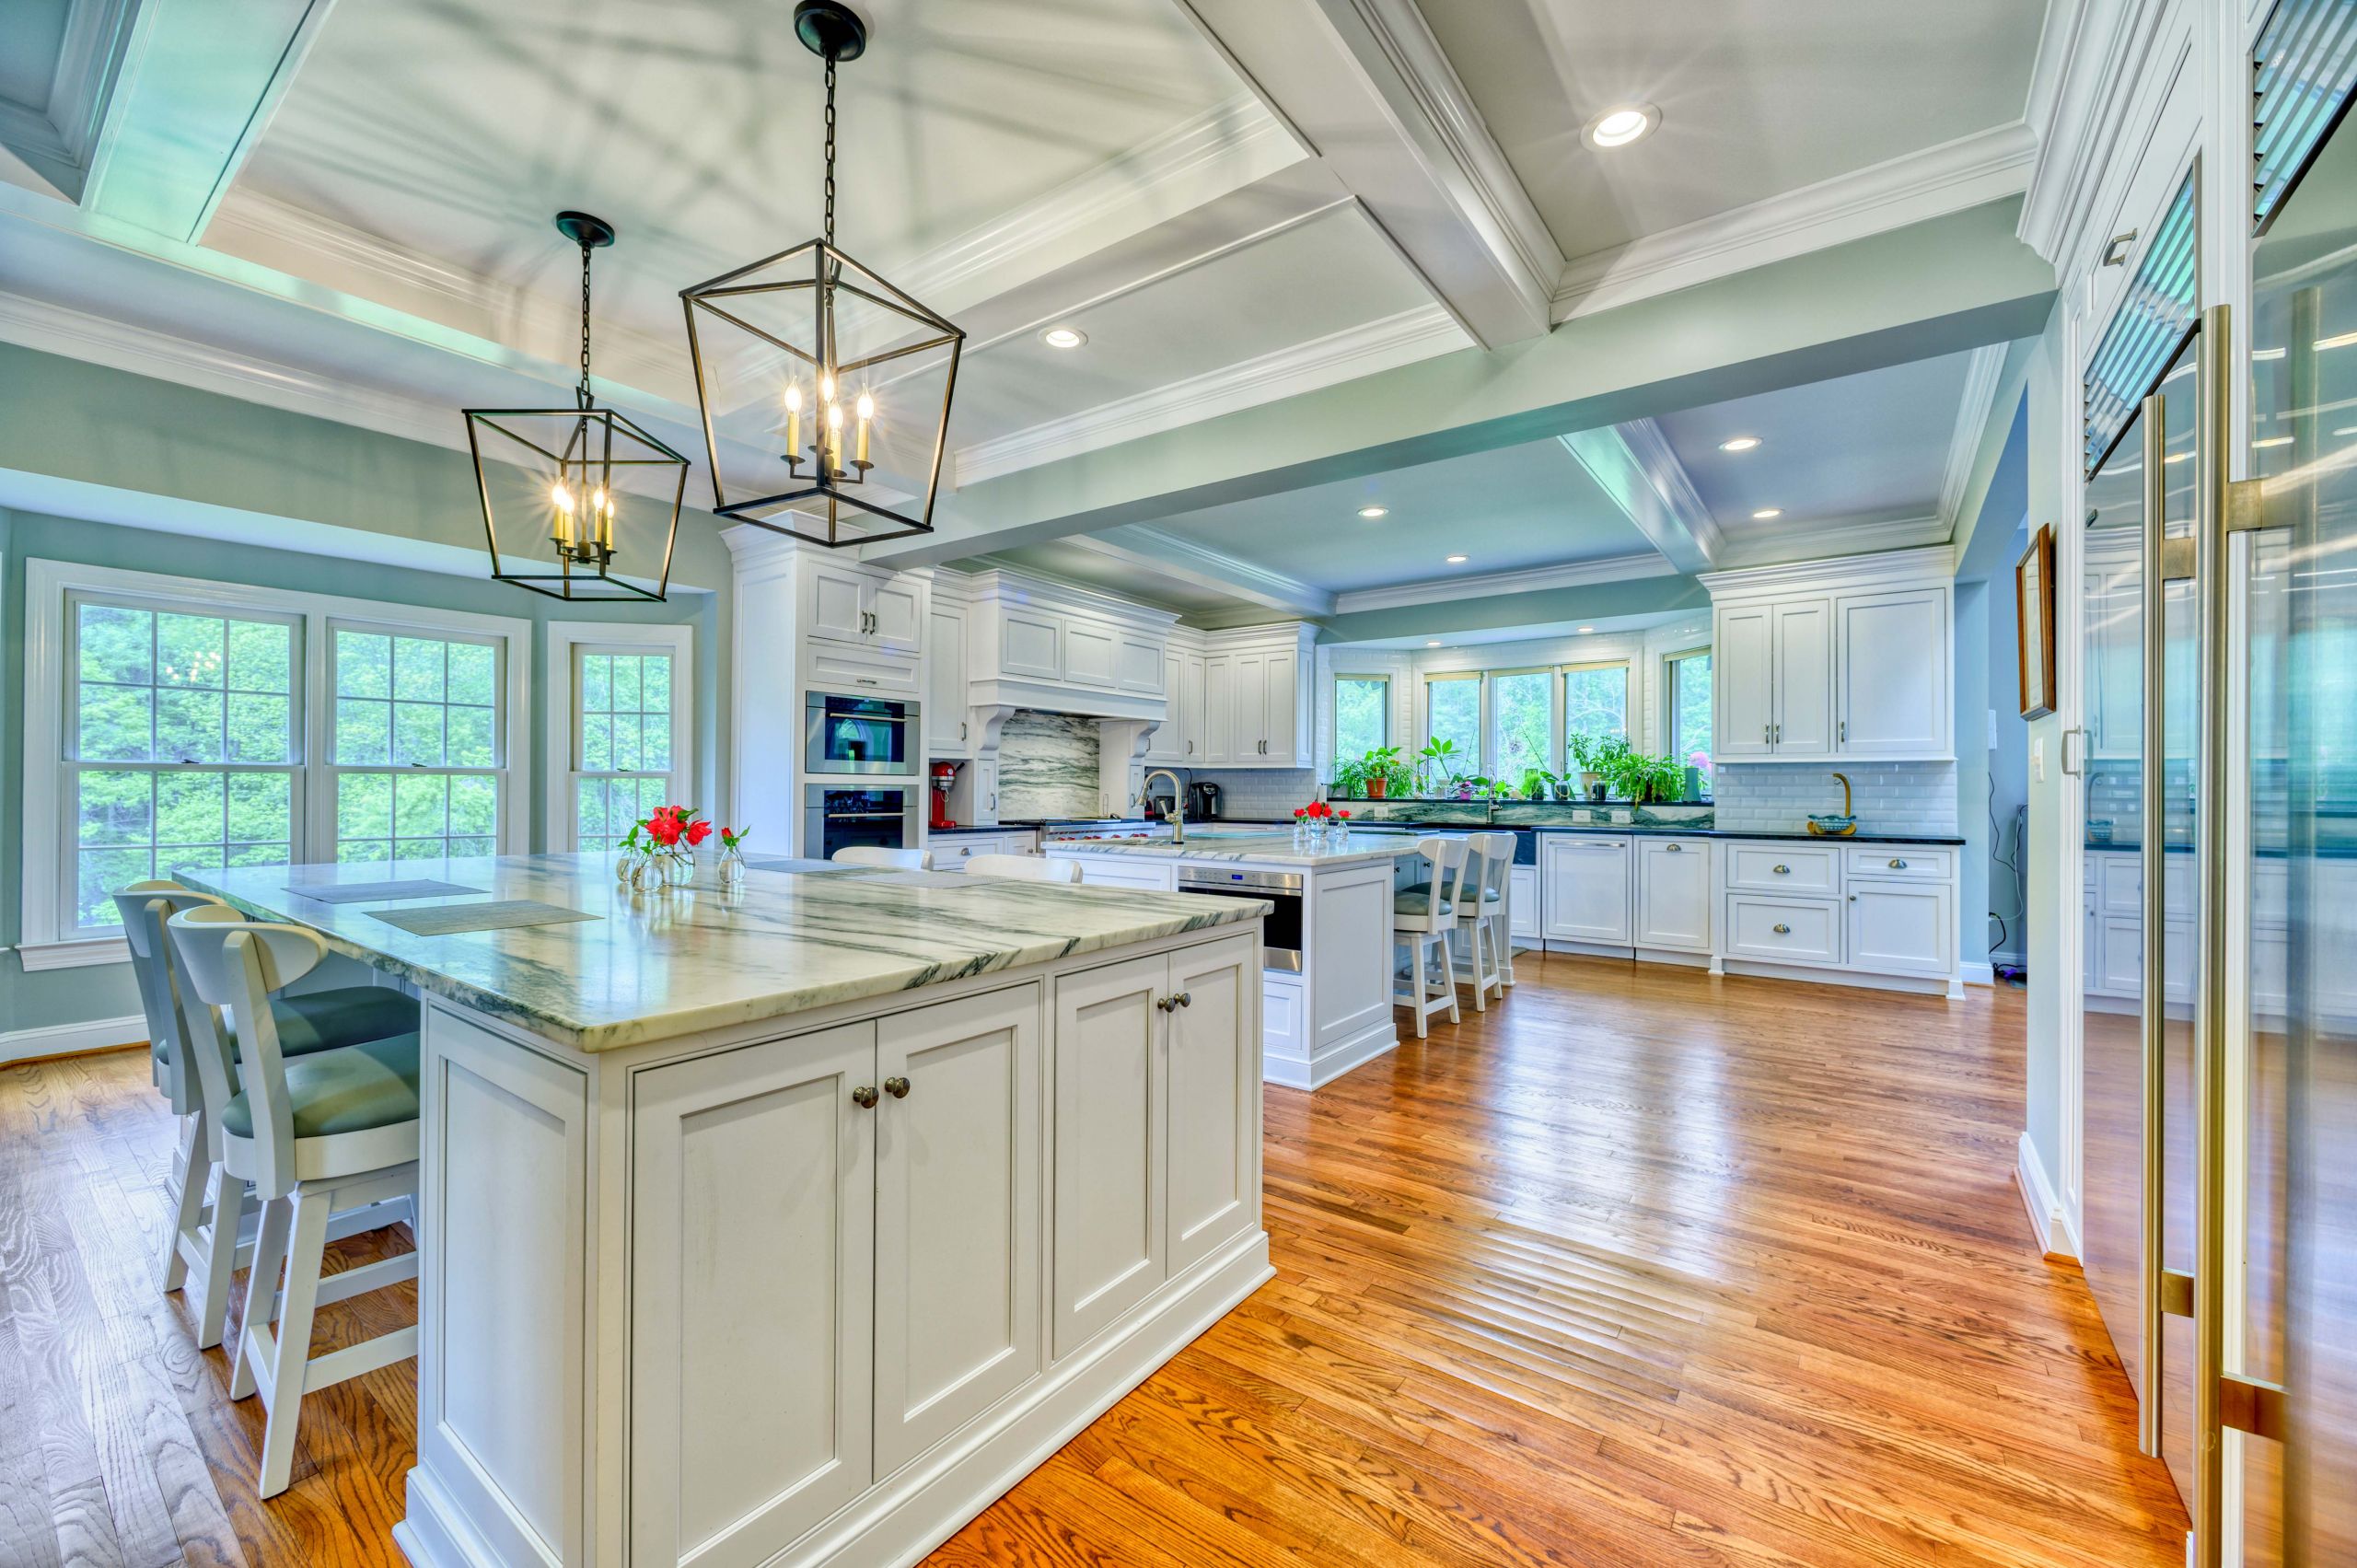 Kitchen Remodels northern Va Awesome 5 Luxurious Kitchen Remodels In northern Virginia